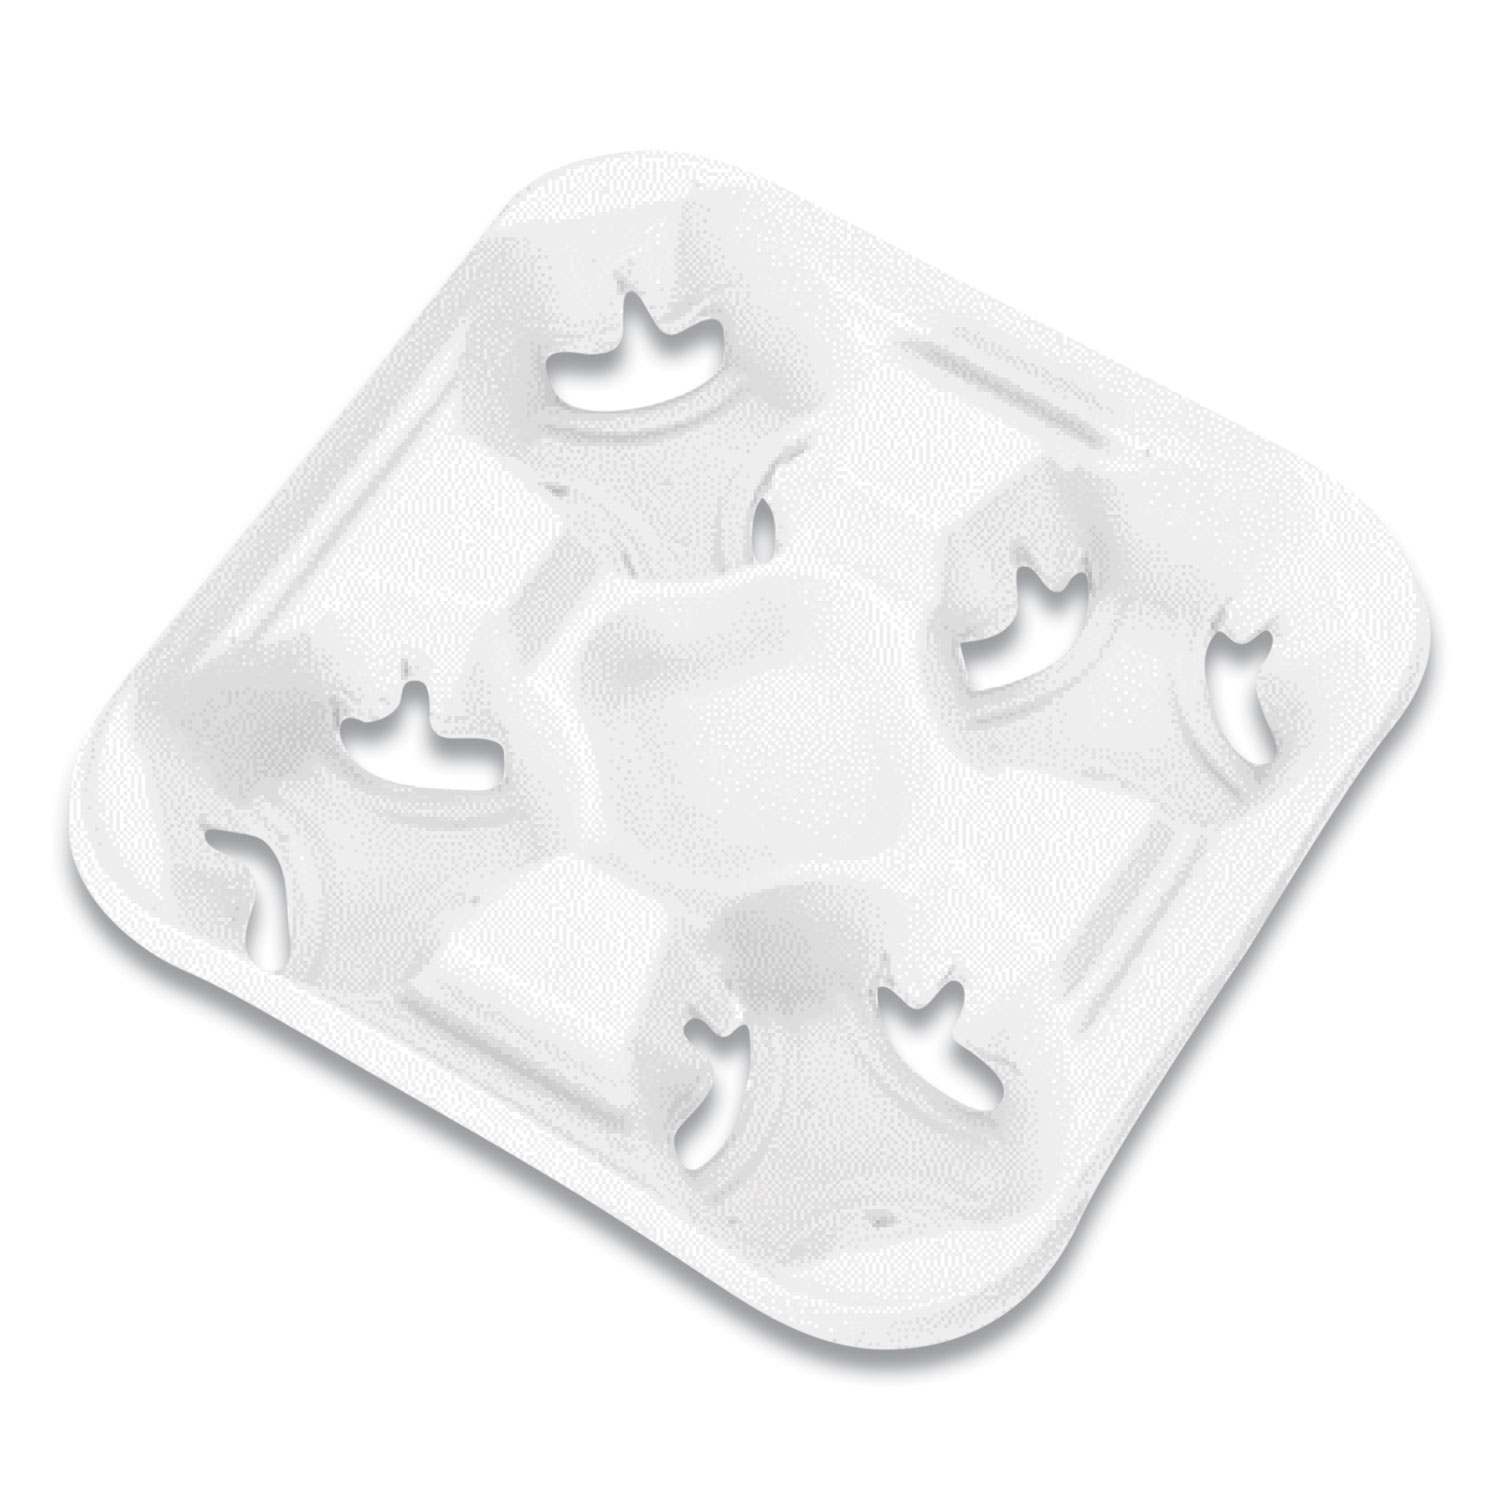 Chinet® StrongHolder Molded Fiber Cup Tray, 8-32 oz, Four Cups, White, 300/Carton